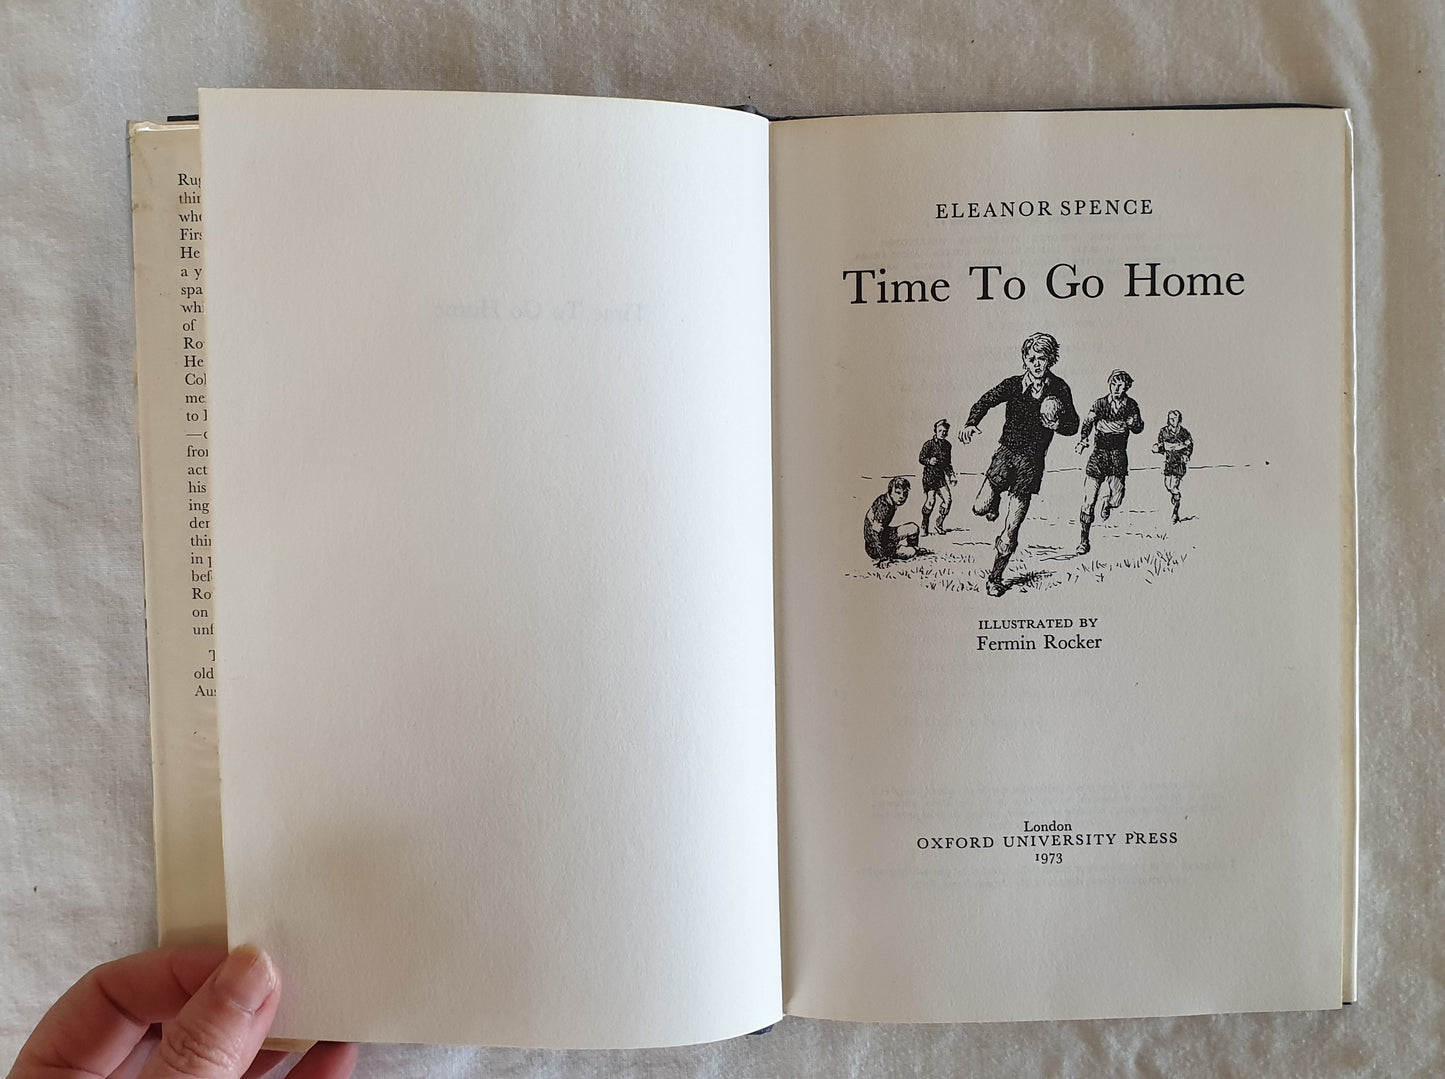 Time To Go Home  by Eleanor Spence  Illustrated by Fermin Rocker